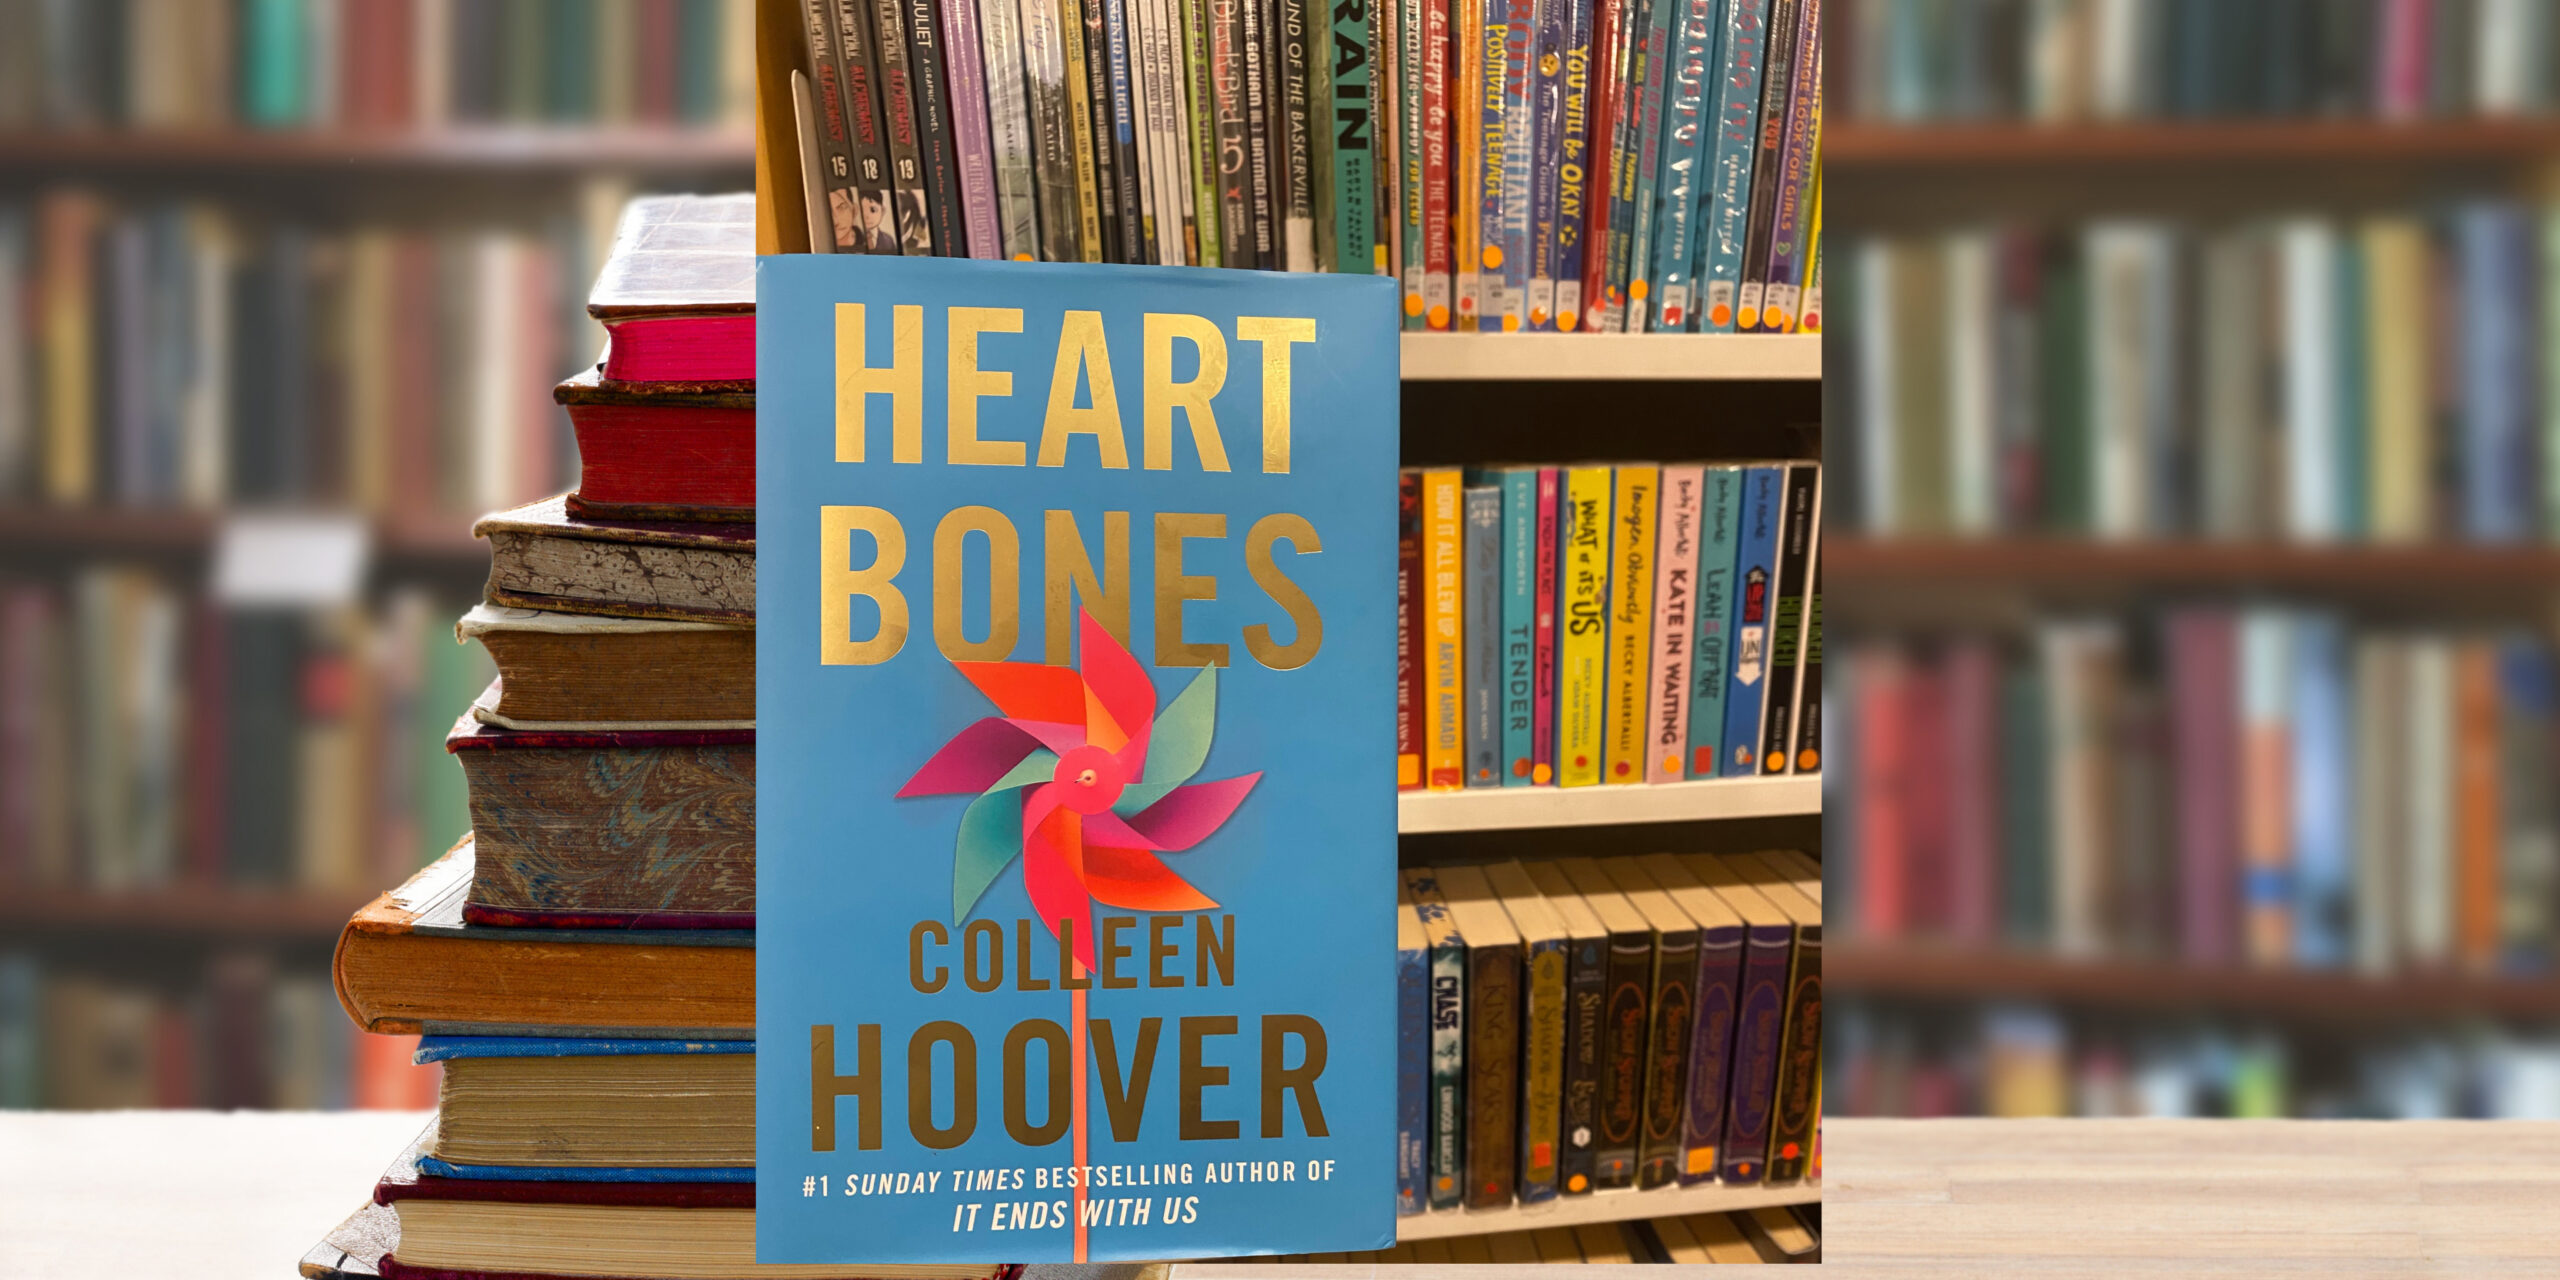 Image of 'Heart of Bones' book in a library